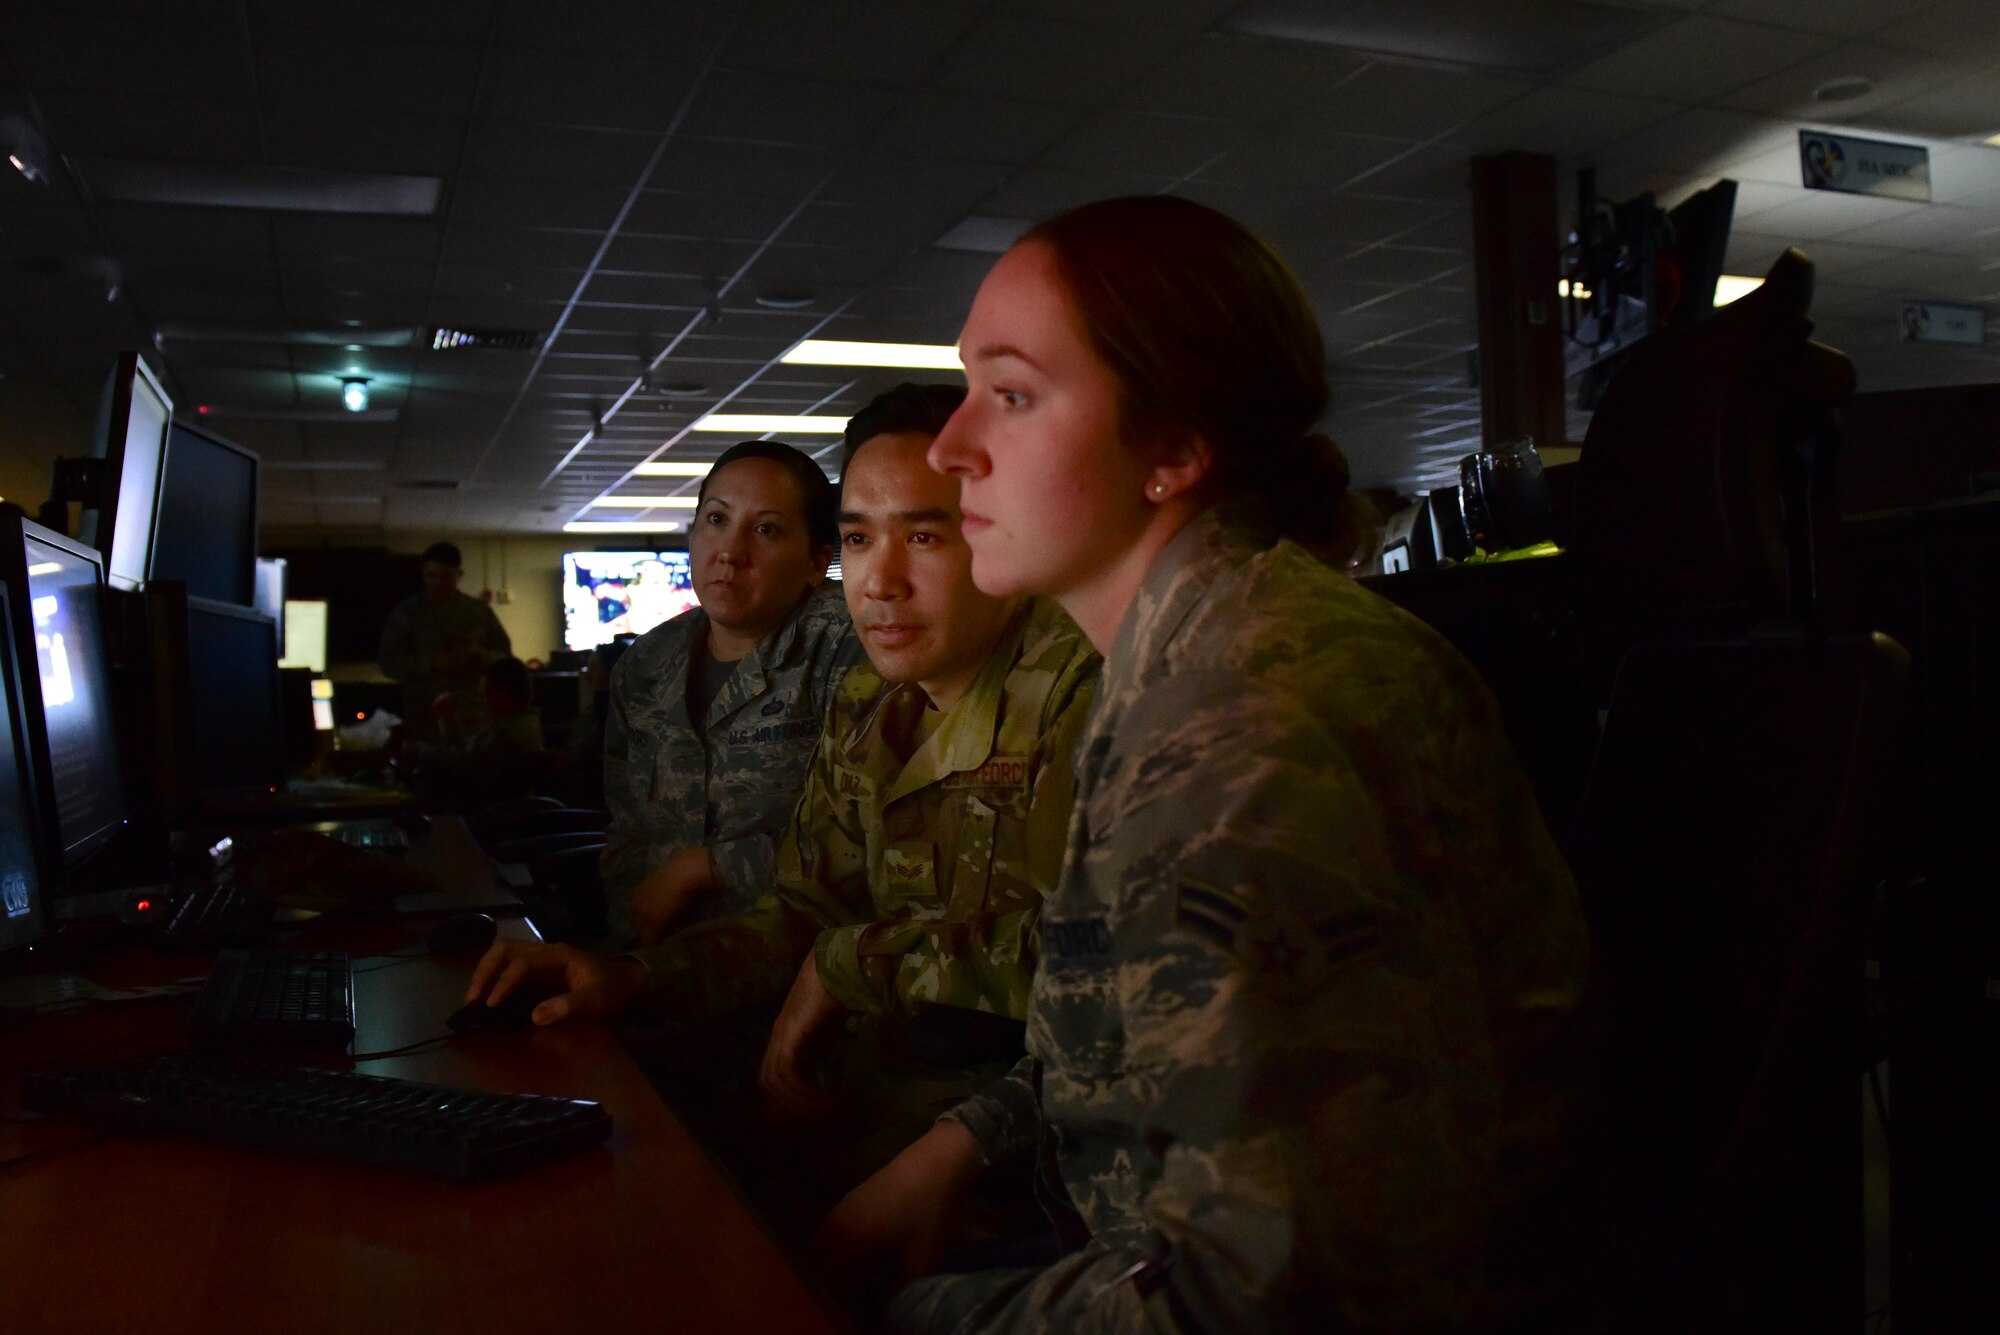 U.S. Air Force Airmen assigned to the 8th Intelligence Squadron conduct analysis at Joint Base Pearl Harbor-Hickam, Hawaii, Feb. 22, 2019. ISR Effects is an initiative that helps connect intelligence analysts to the outcome of their efforts. (U.S. Air Force photo by Staff Sgt. Eboni Prince)